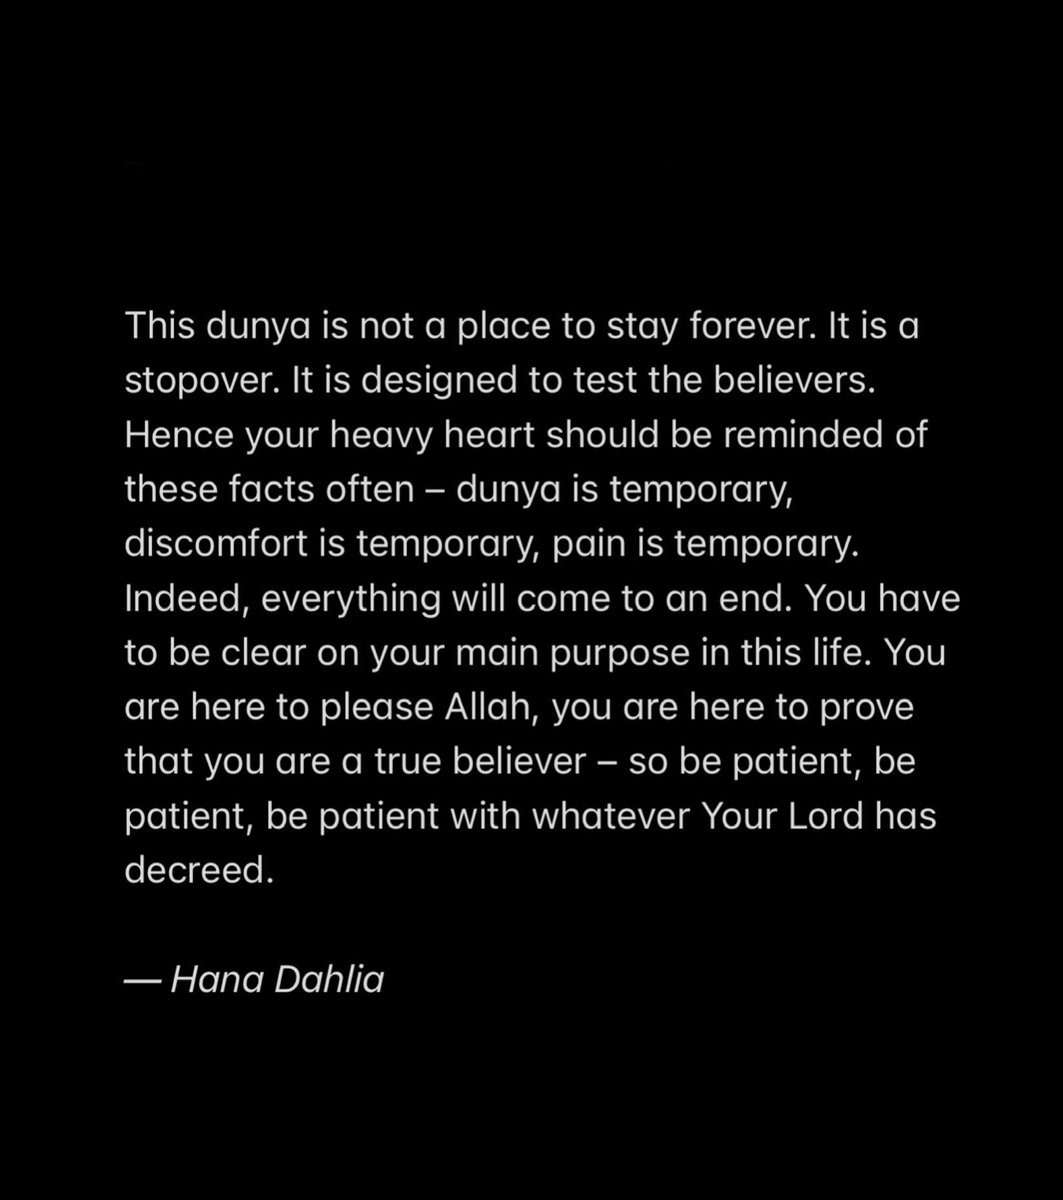 Dunya is temporary, discomfort is temporary, pain is temporary.